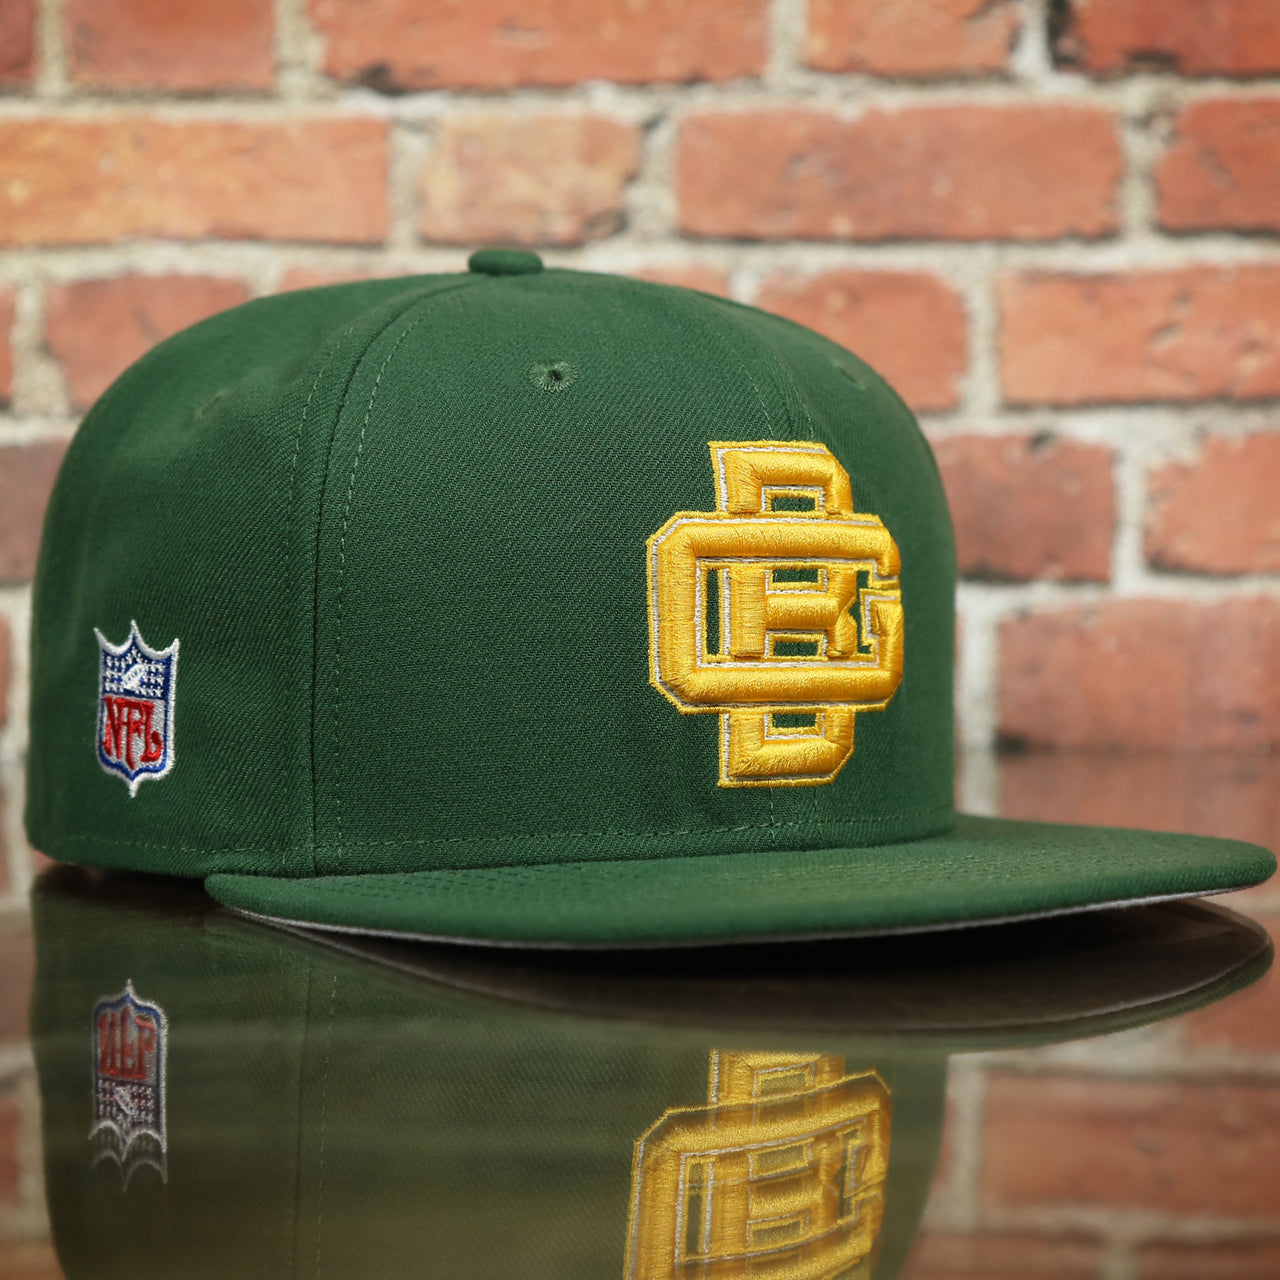 NEW ERA | GREEN BAY PACKERS | ON FIELD 56-69 | NFL PATCH RIGHT | 9FIFTY SNAPBACK HAT | GREEN | OSFM